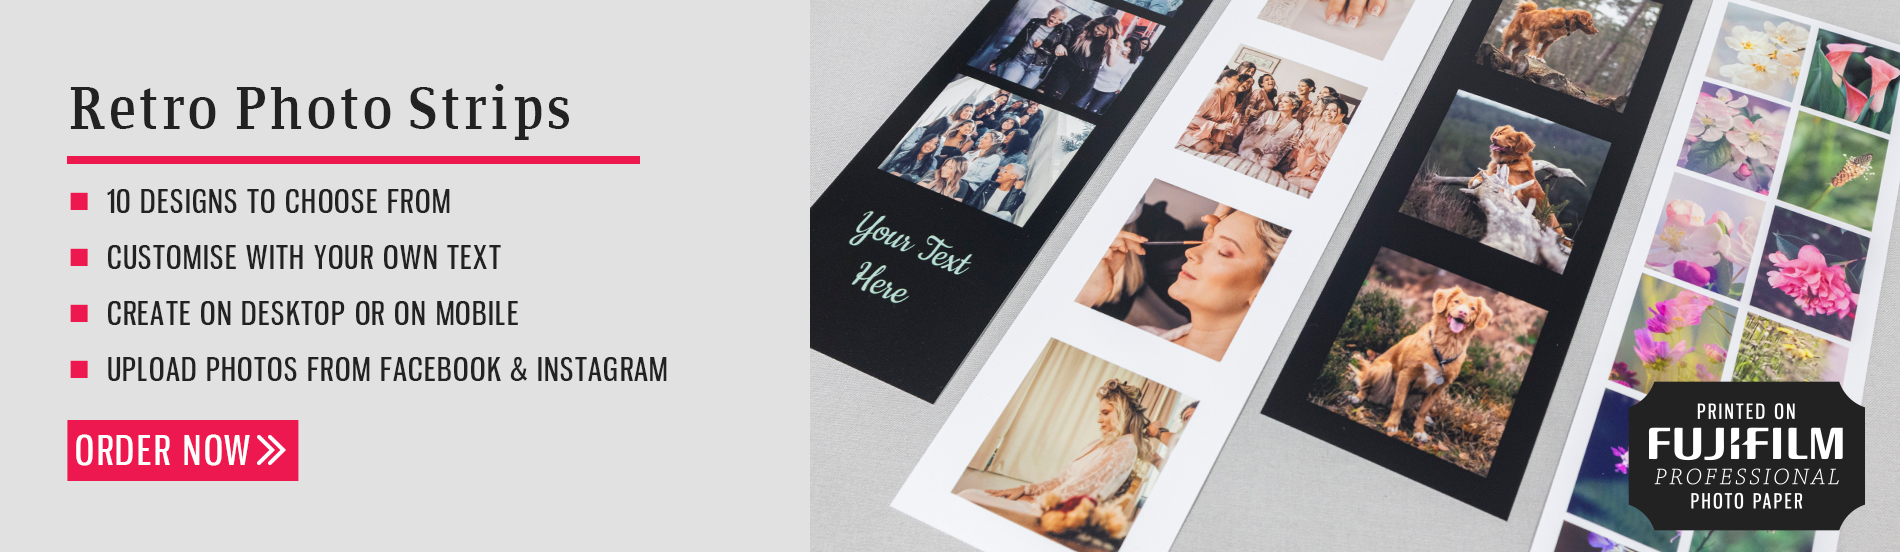 retro style photo booth photo strips banner